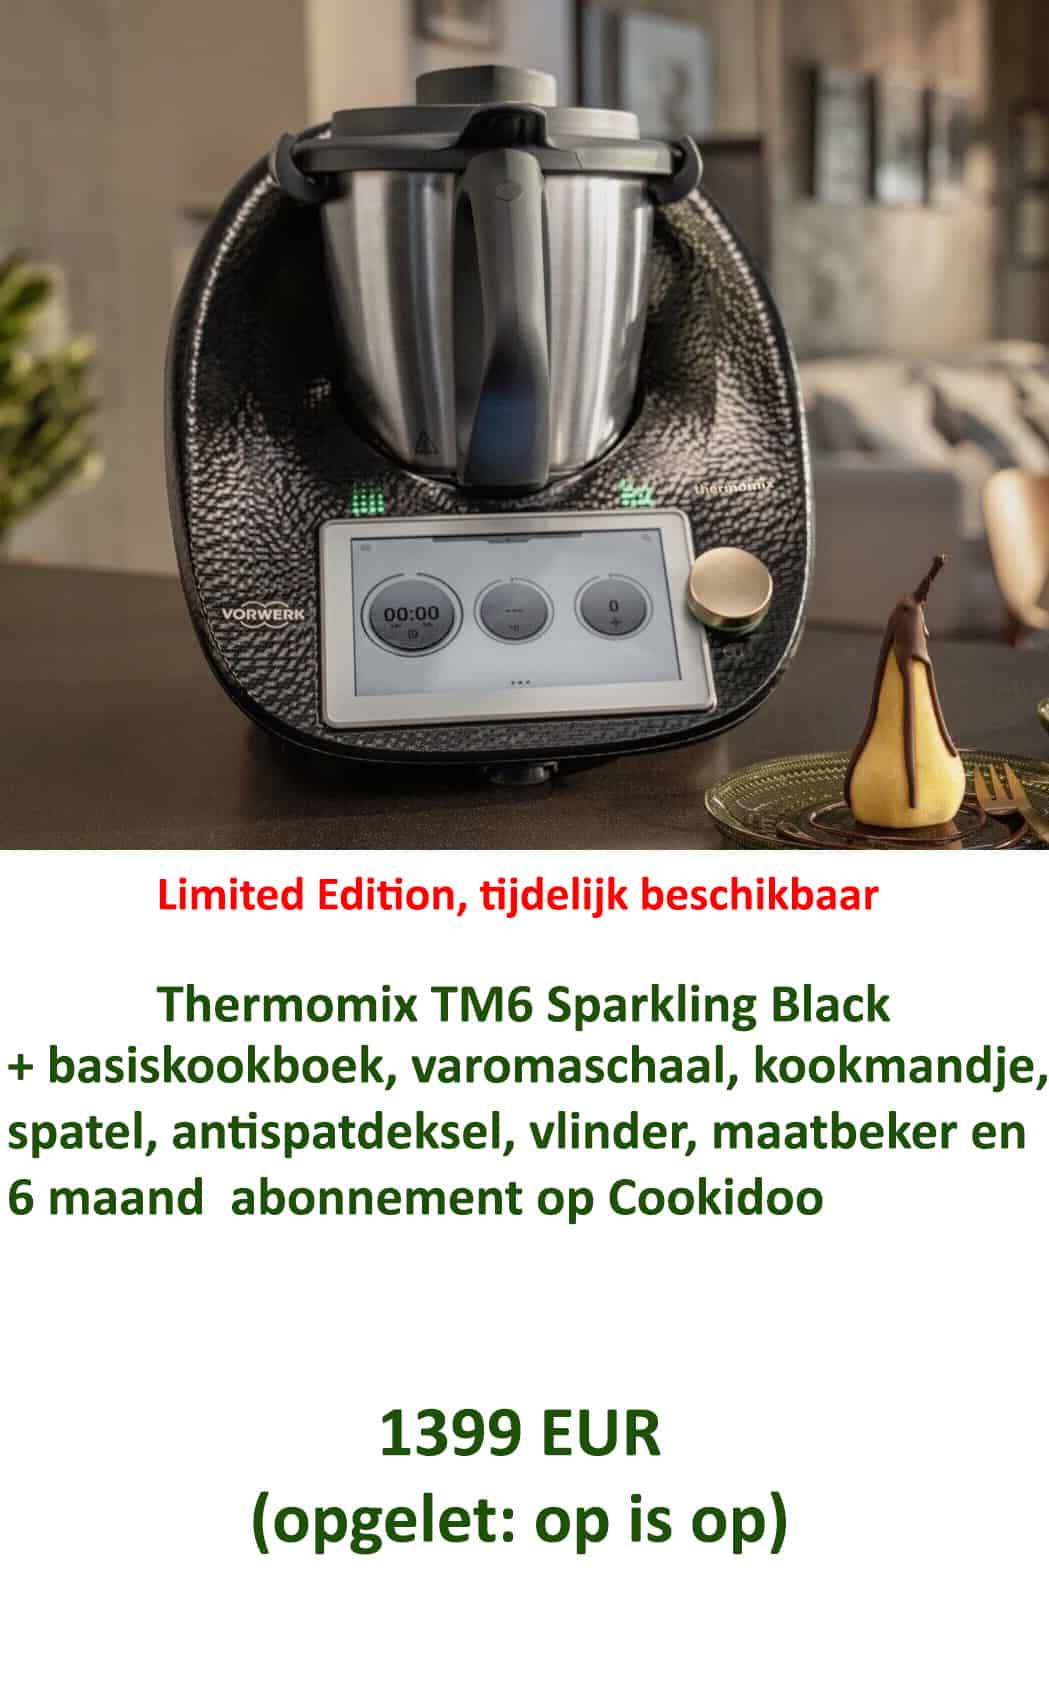 Thermomix TM6 sparkling black limited edition